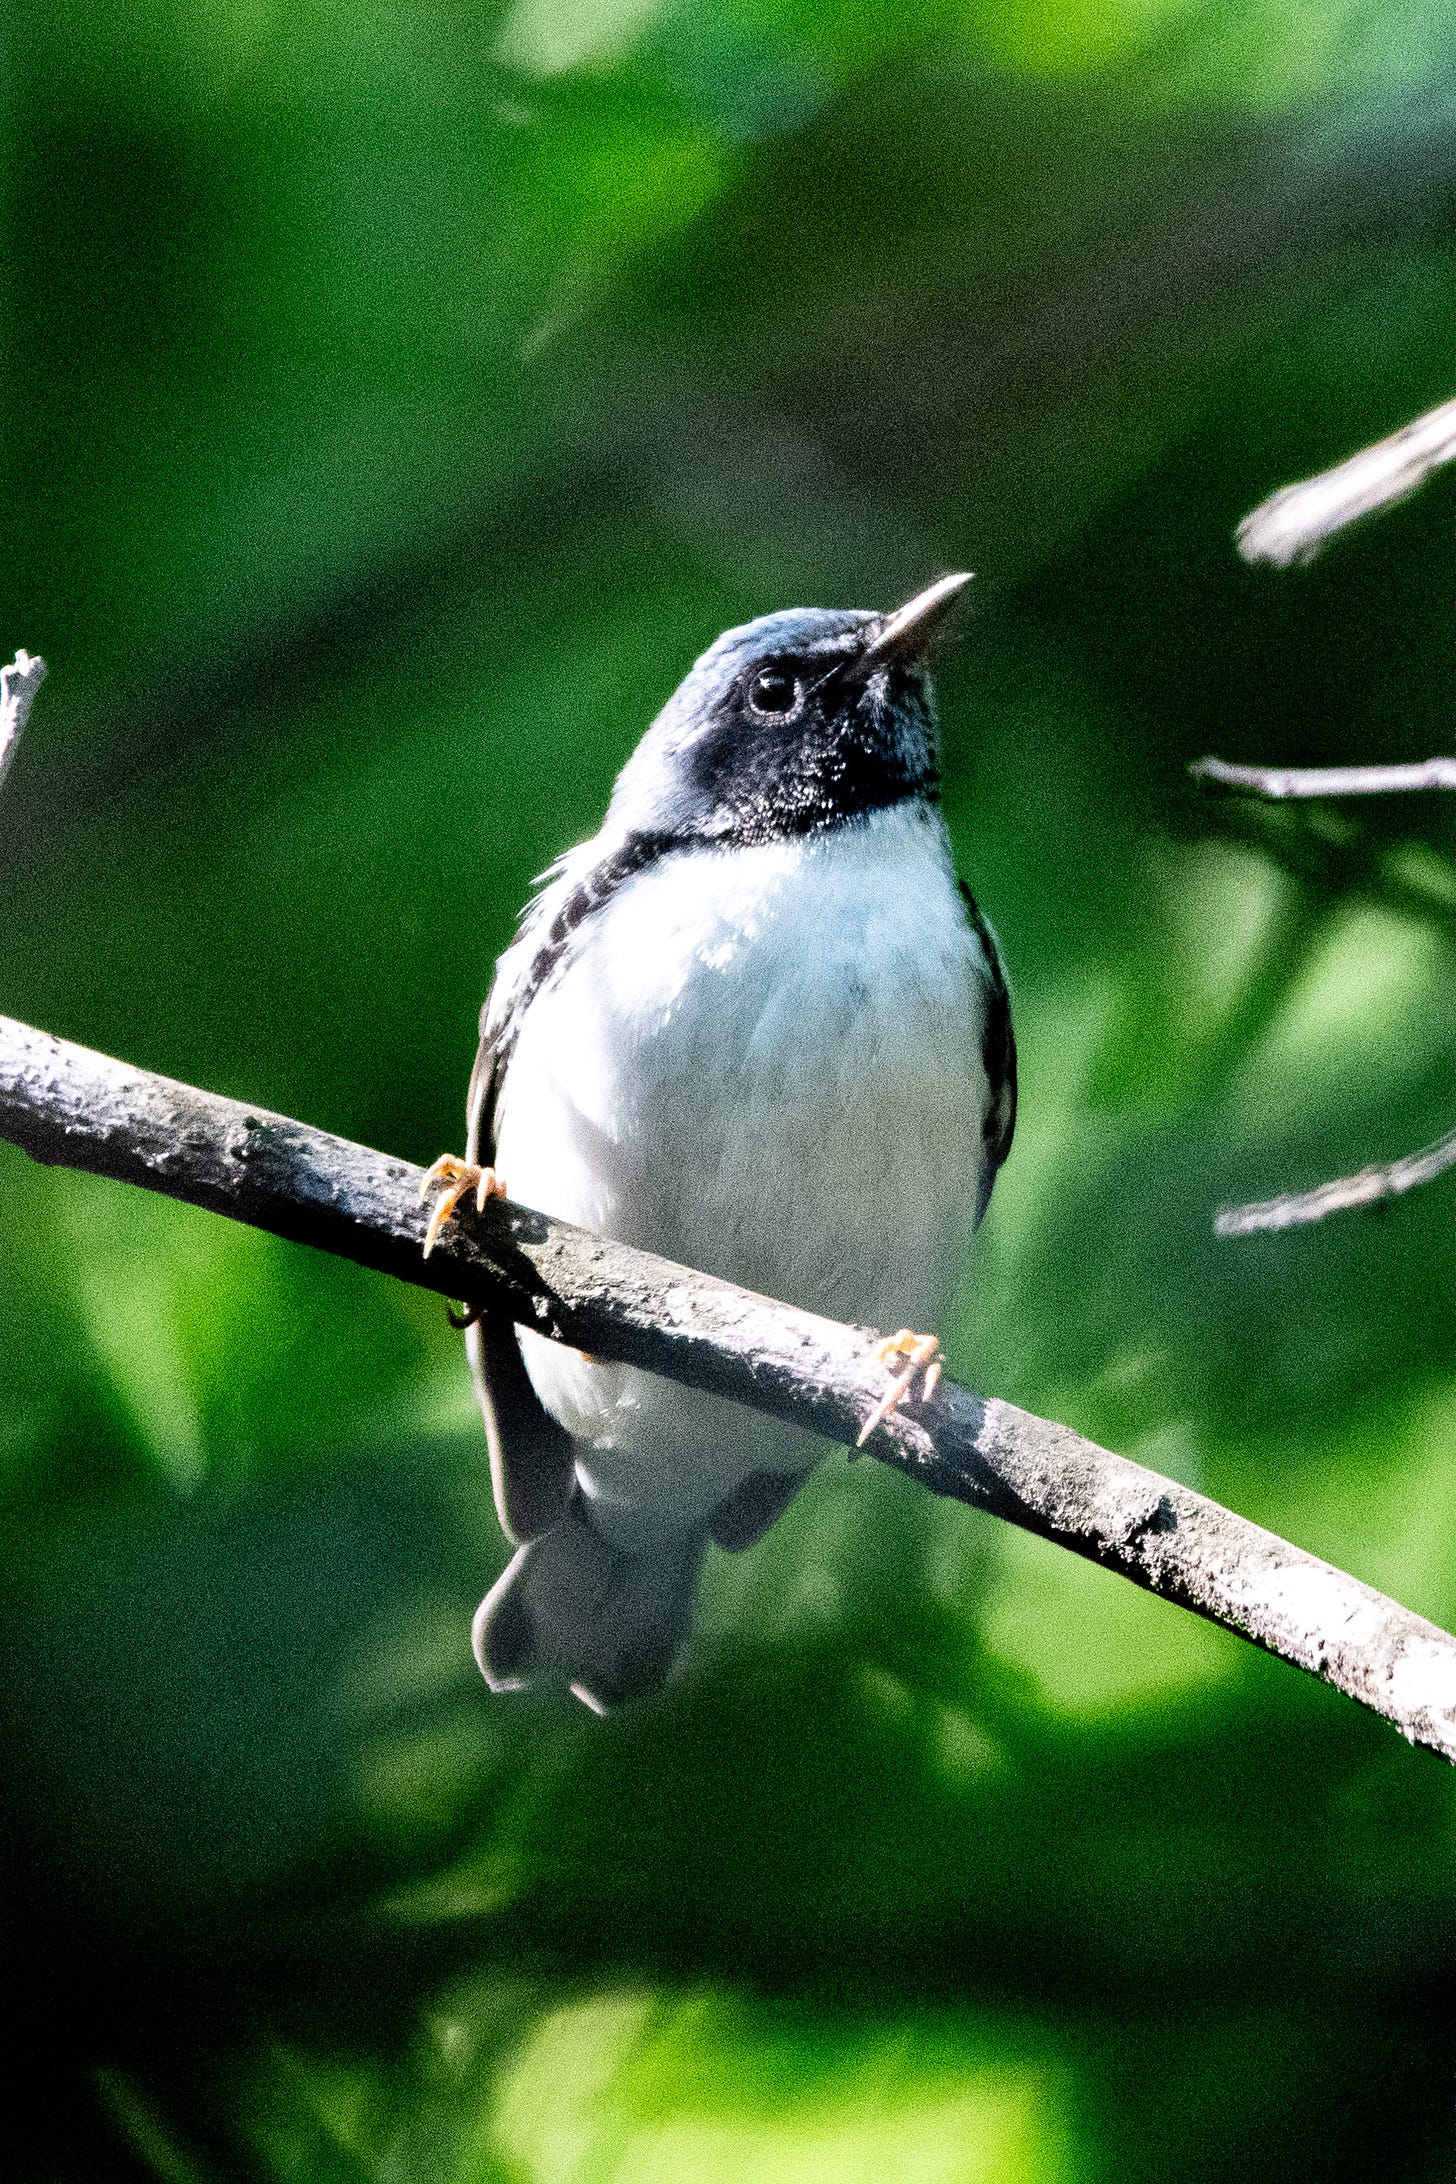 A black-throated blue warbler, a small bird with a black face, a blue cap, and a white breast, grips a diagonal branch